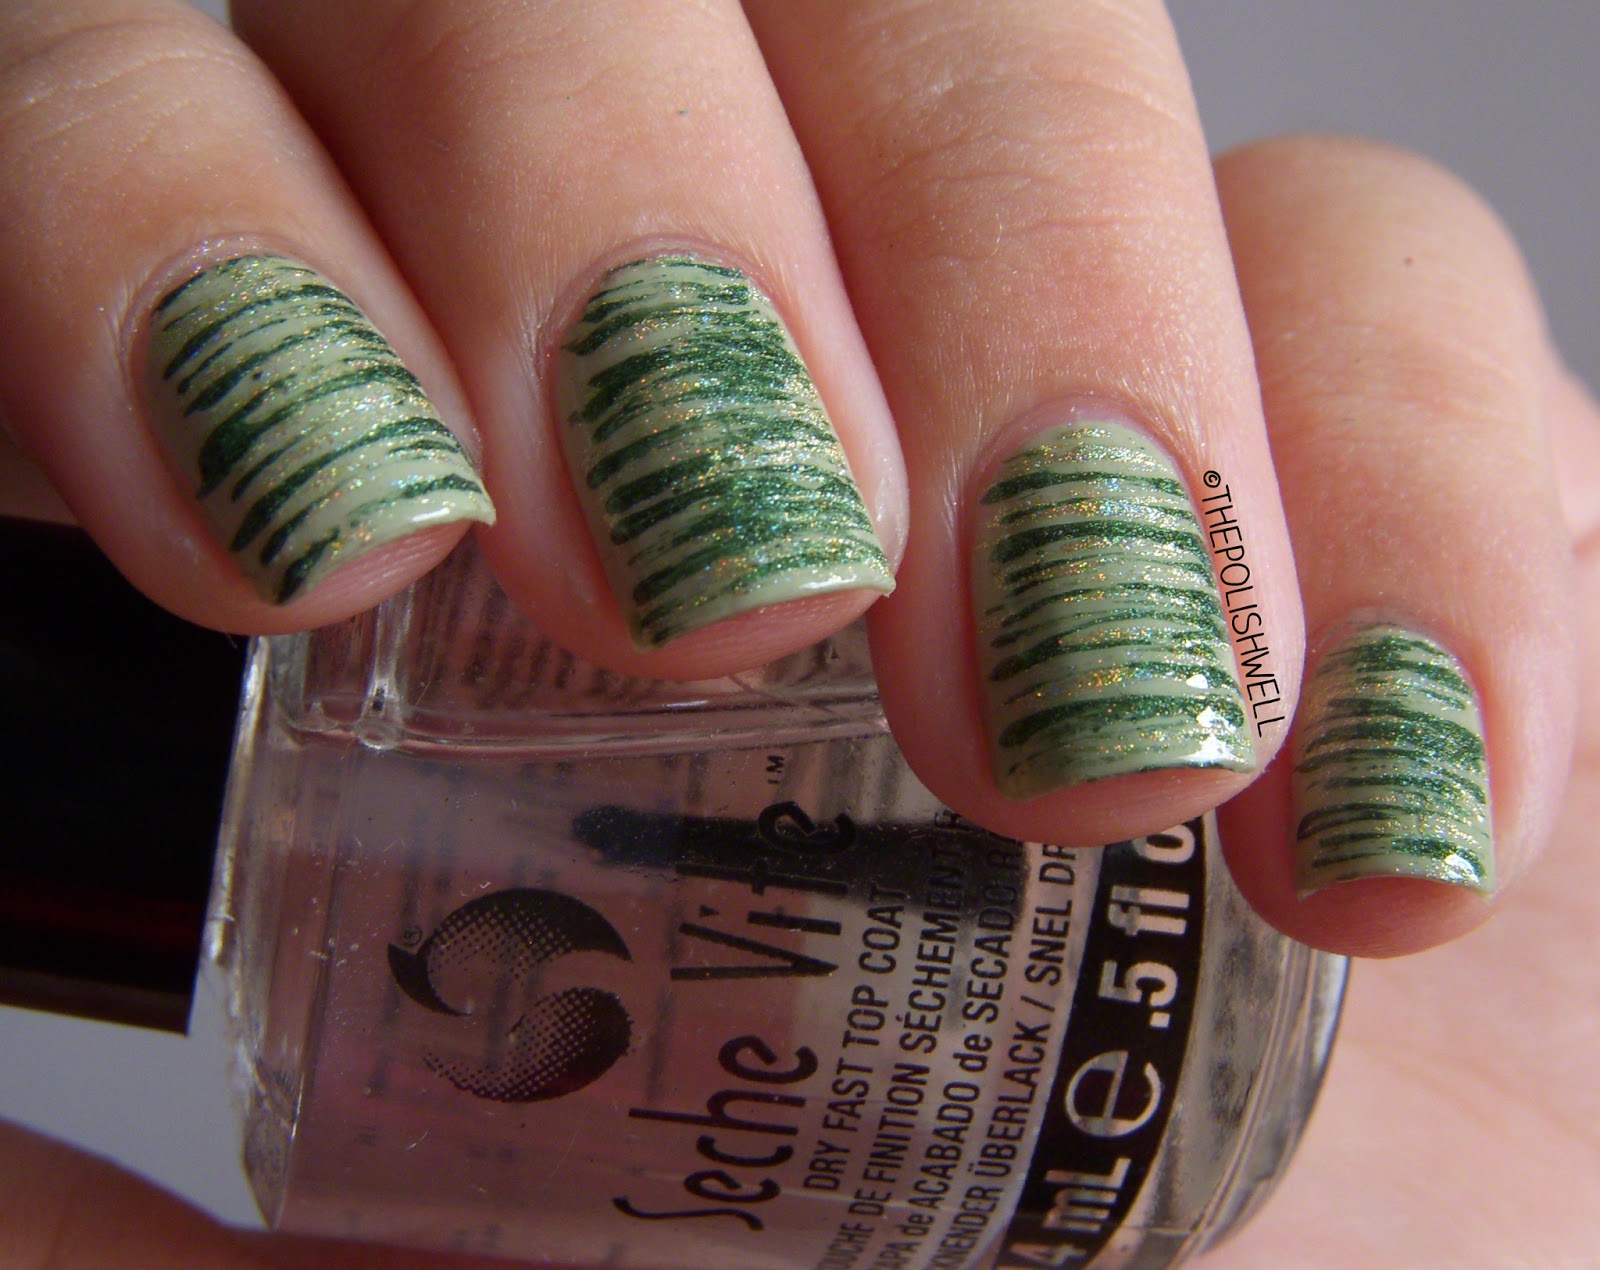 St. Patrick's Day Nail Art Ideas - wide 6